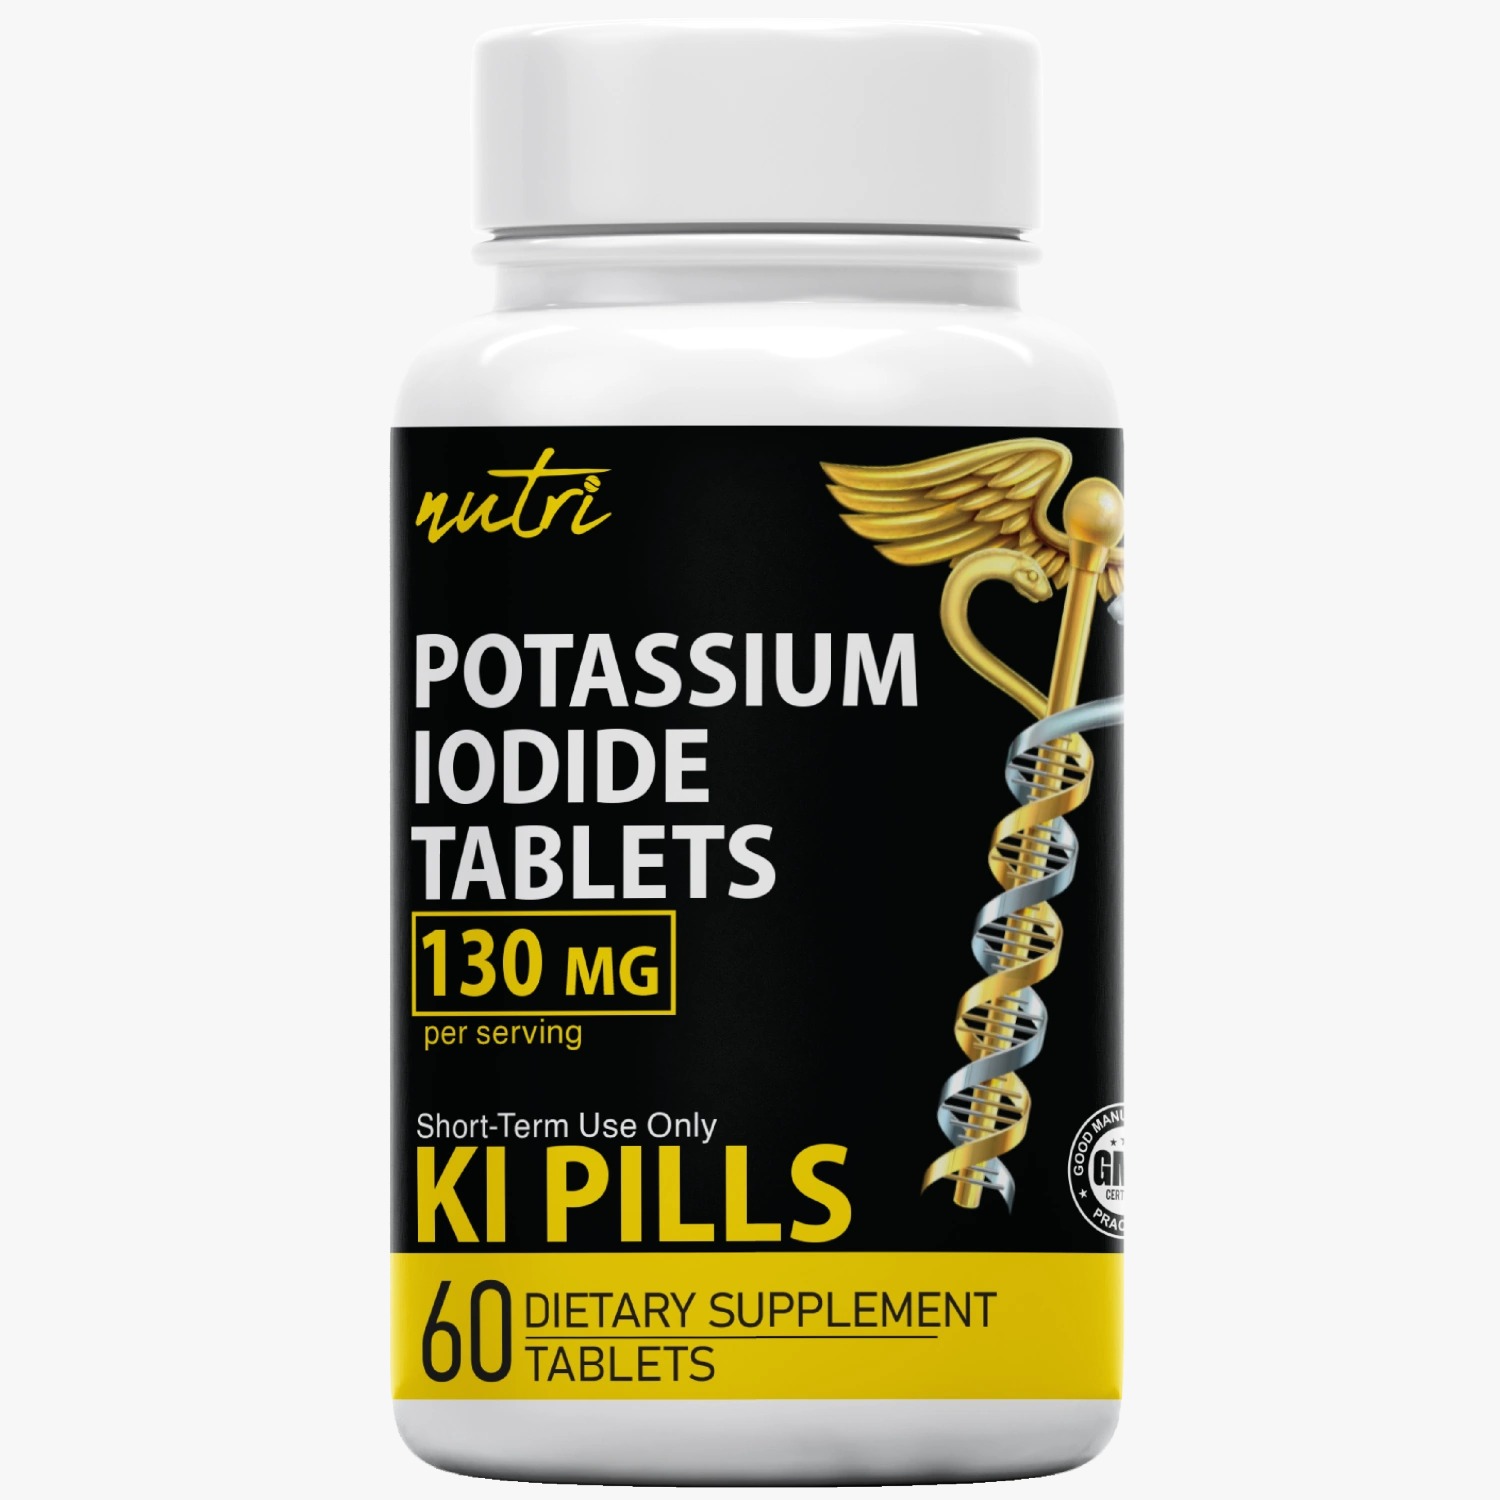 Potassium Iodide Tablets: A Must-Have for Emergency Preparedness